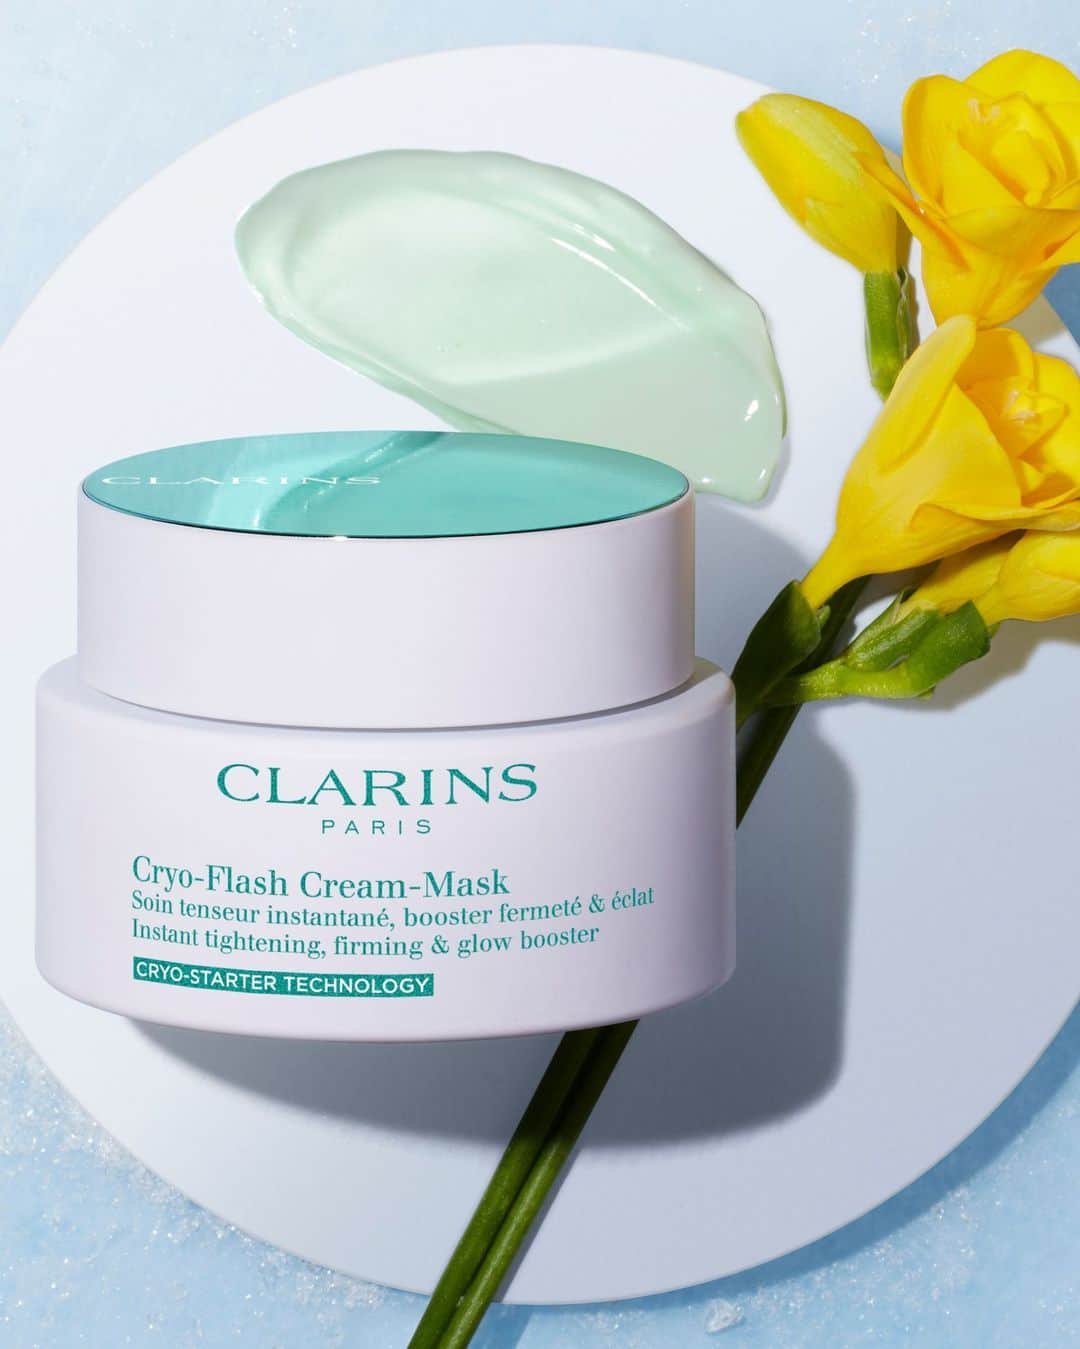 Clarins Australiaのインスタグラム：「Why did we look to cryotherapy for our latest #proageing face mask? ⁣⁣ ⁣⁣ Clarins Research studied the benefits of cold temperature in contact with the skin. This contact helps to strengthen the skin barrier, which may help prevent visible signs of ageing. ⁣⁣ ⁣⁣ #FaceMask #ClarinsCryoFlash #Cryotherapy」